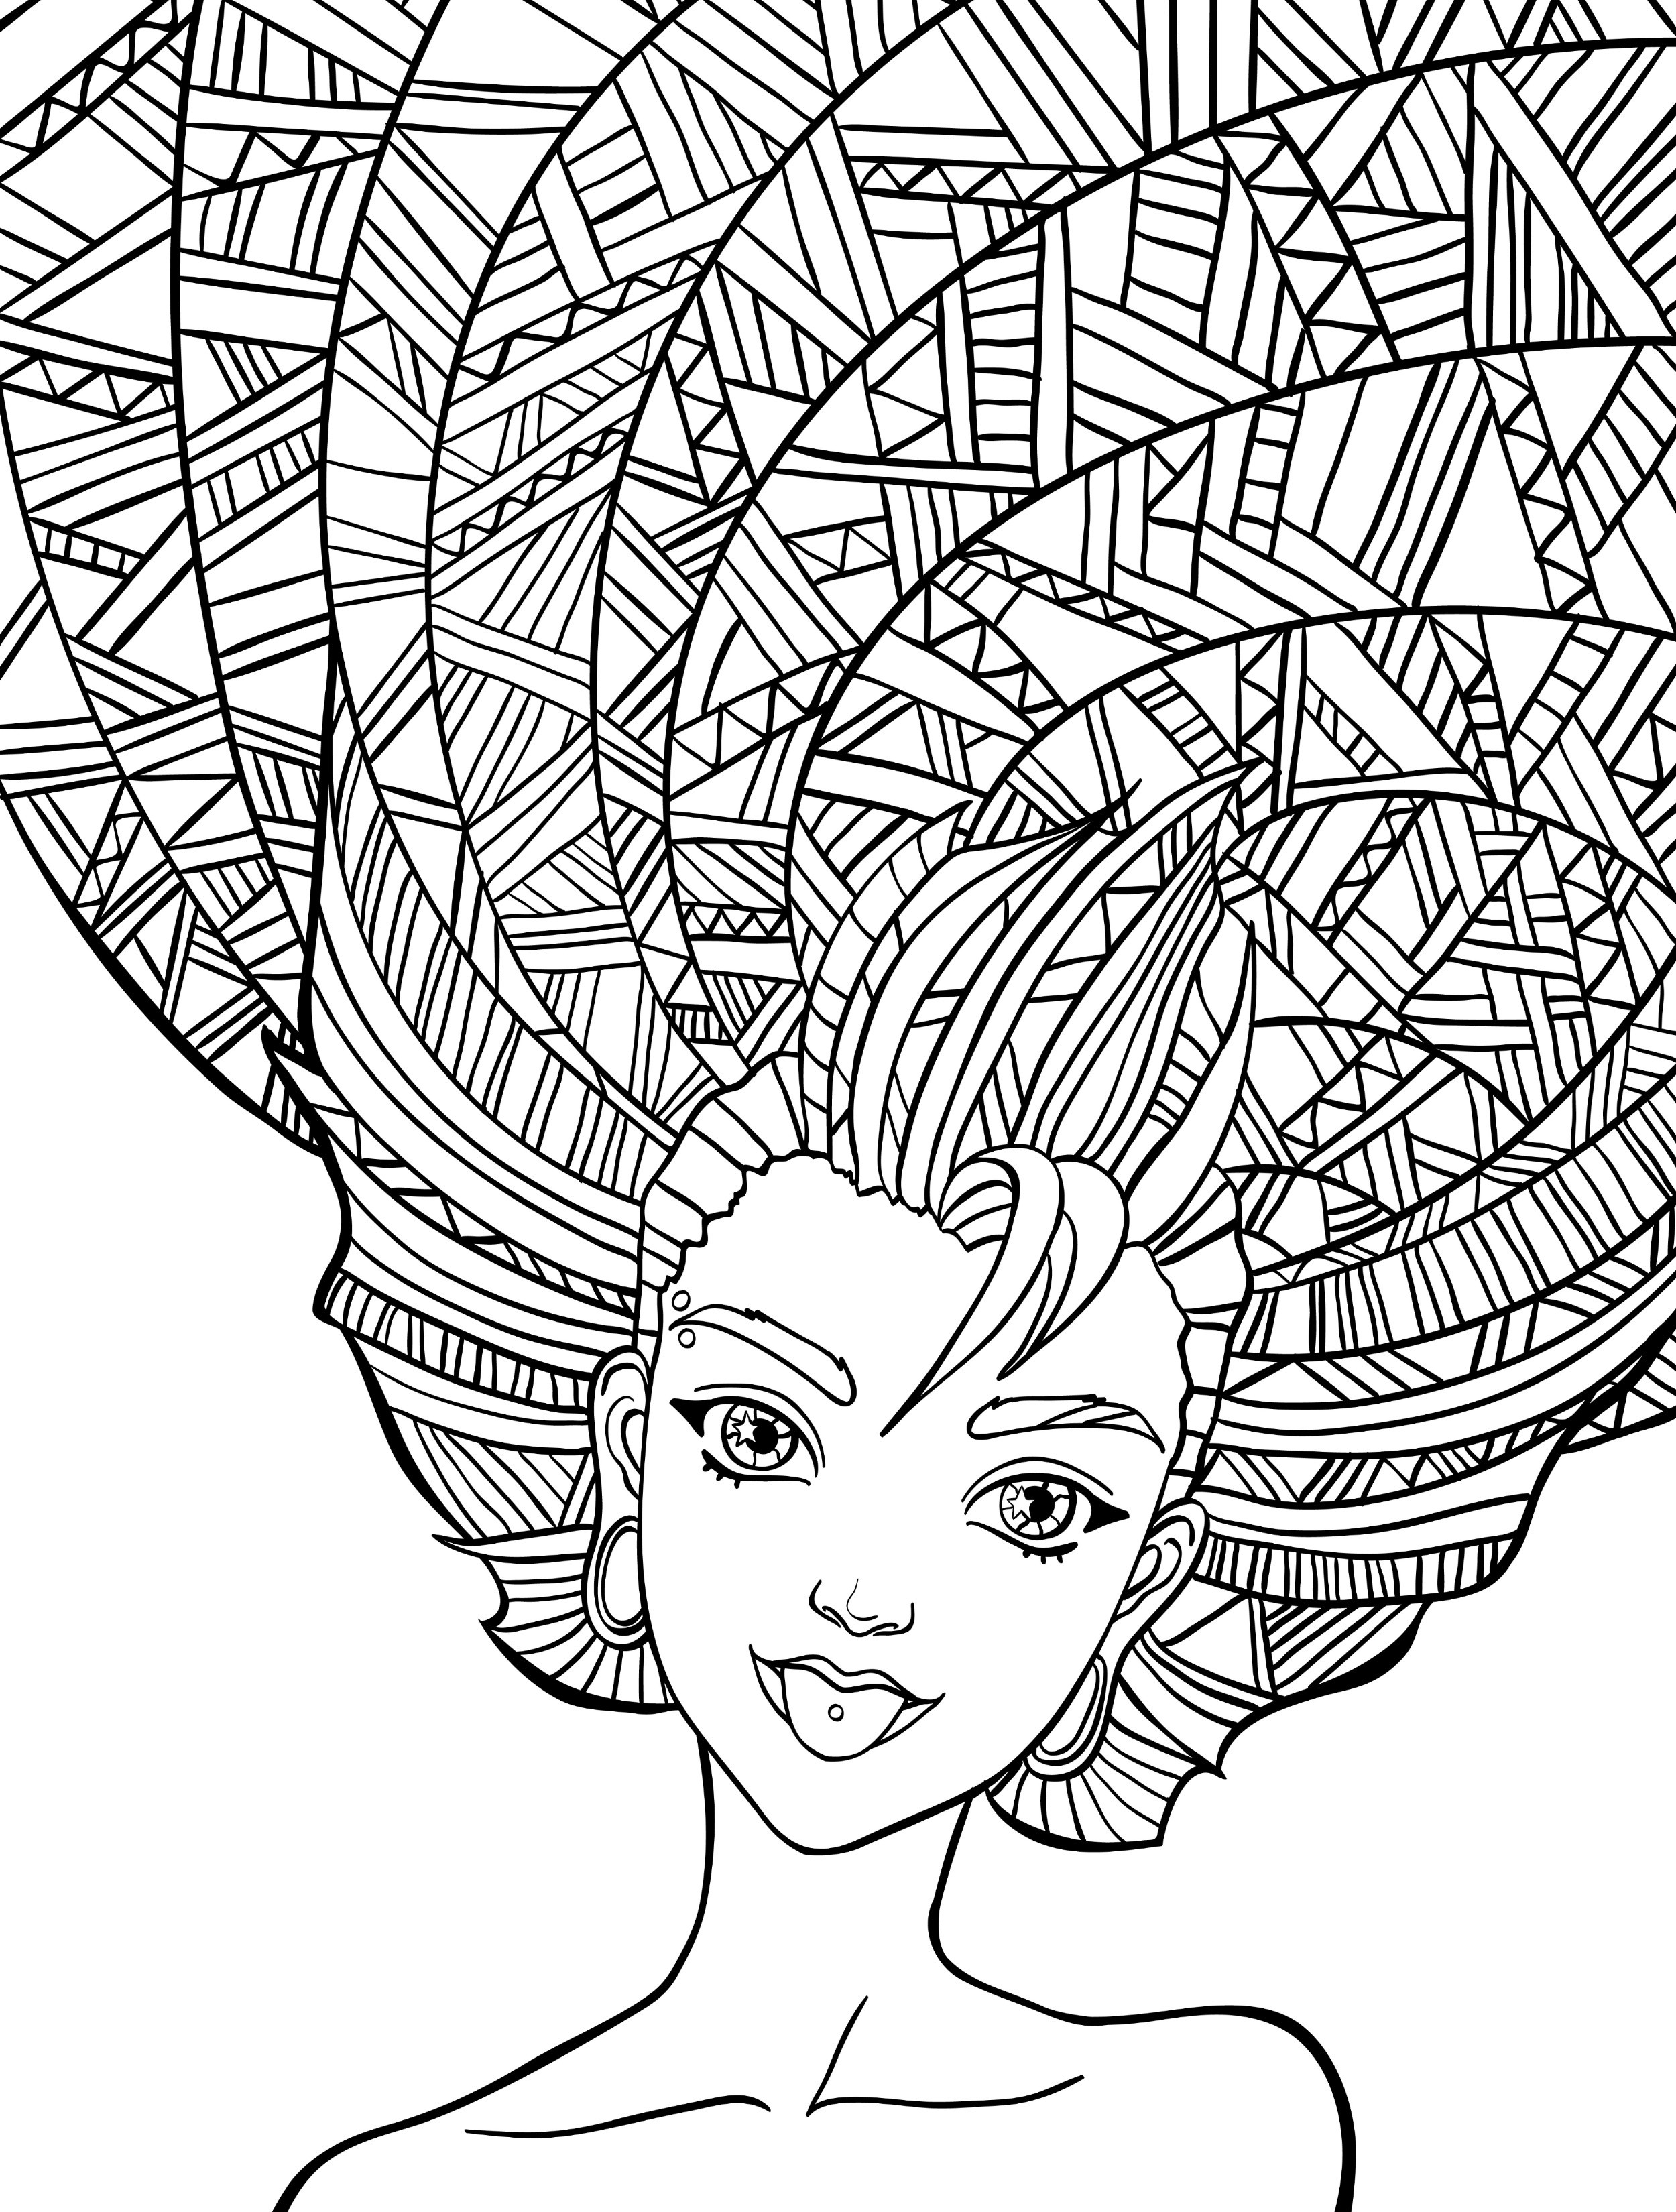 Hair Coloring Book
 10 Crazy Hair Adult Coloring Pages Page 9 of 12 Nerdy